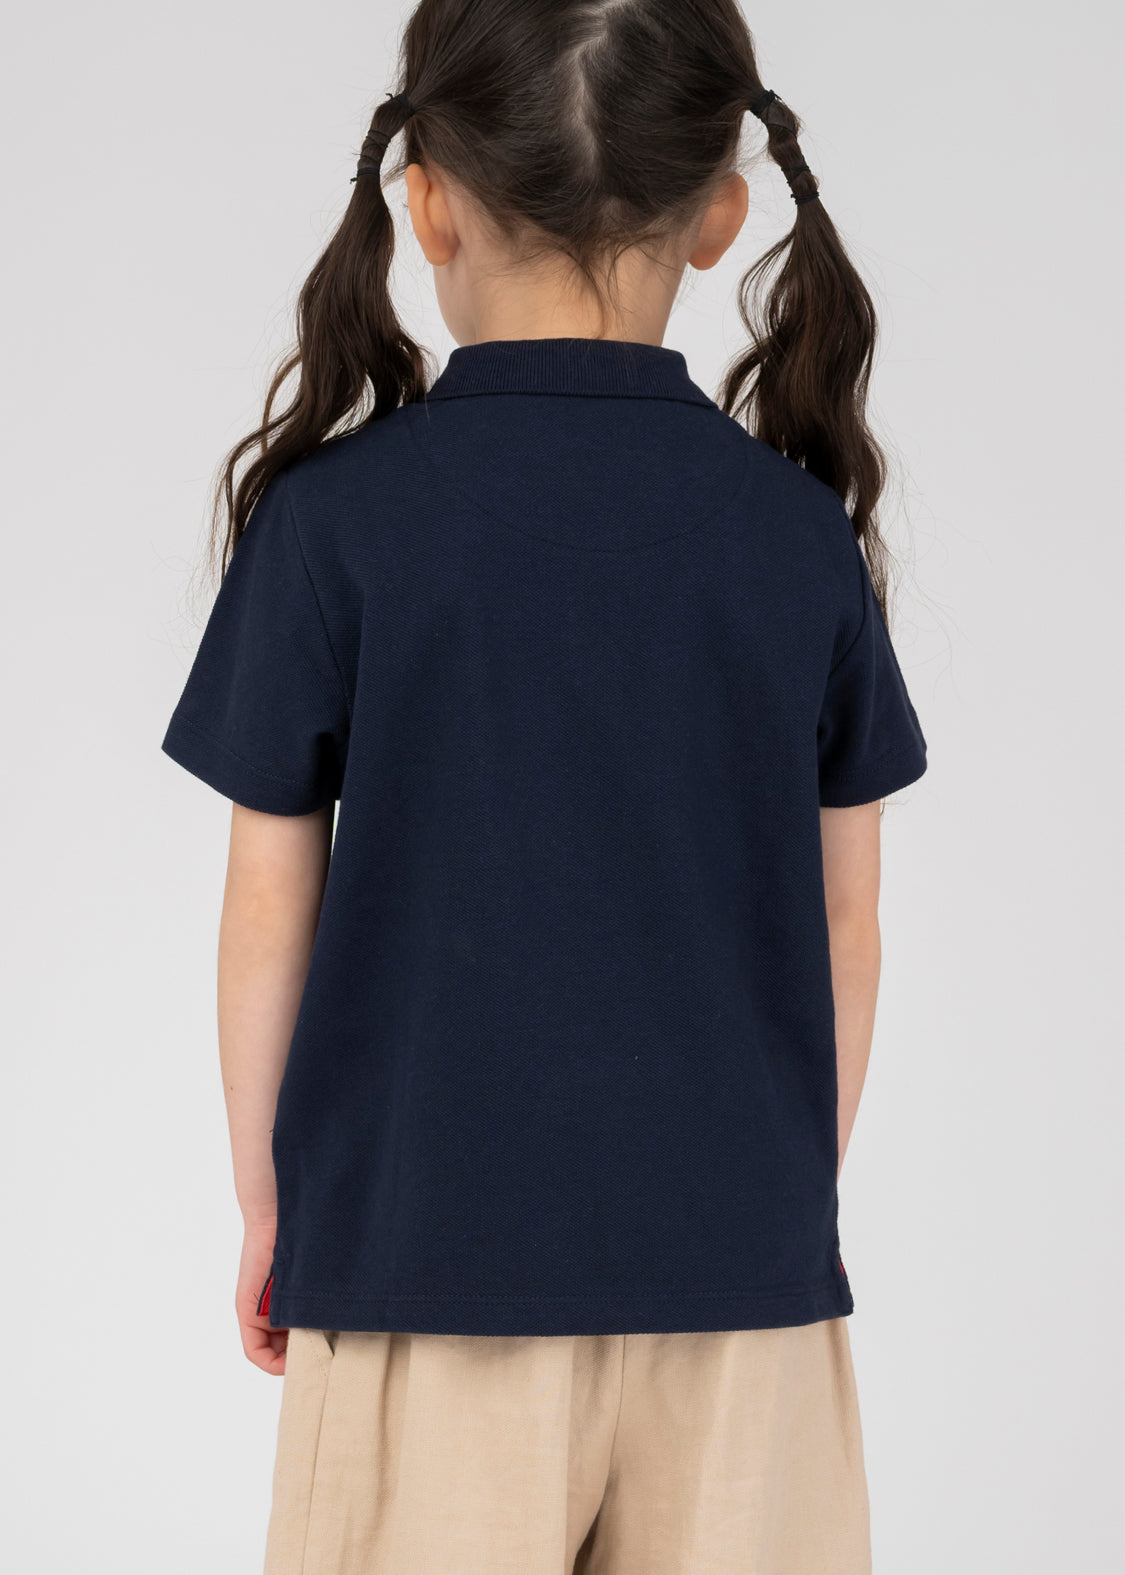 Eric Carle Short Sleeve Polo Shirt (Eric Carle_The Very Hungry Caterpillar Embroidery 2) - Kids